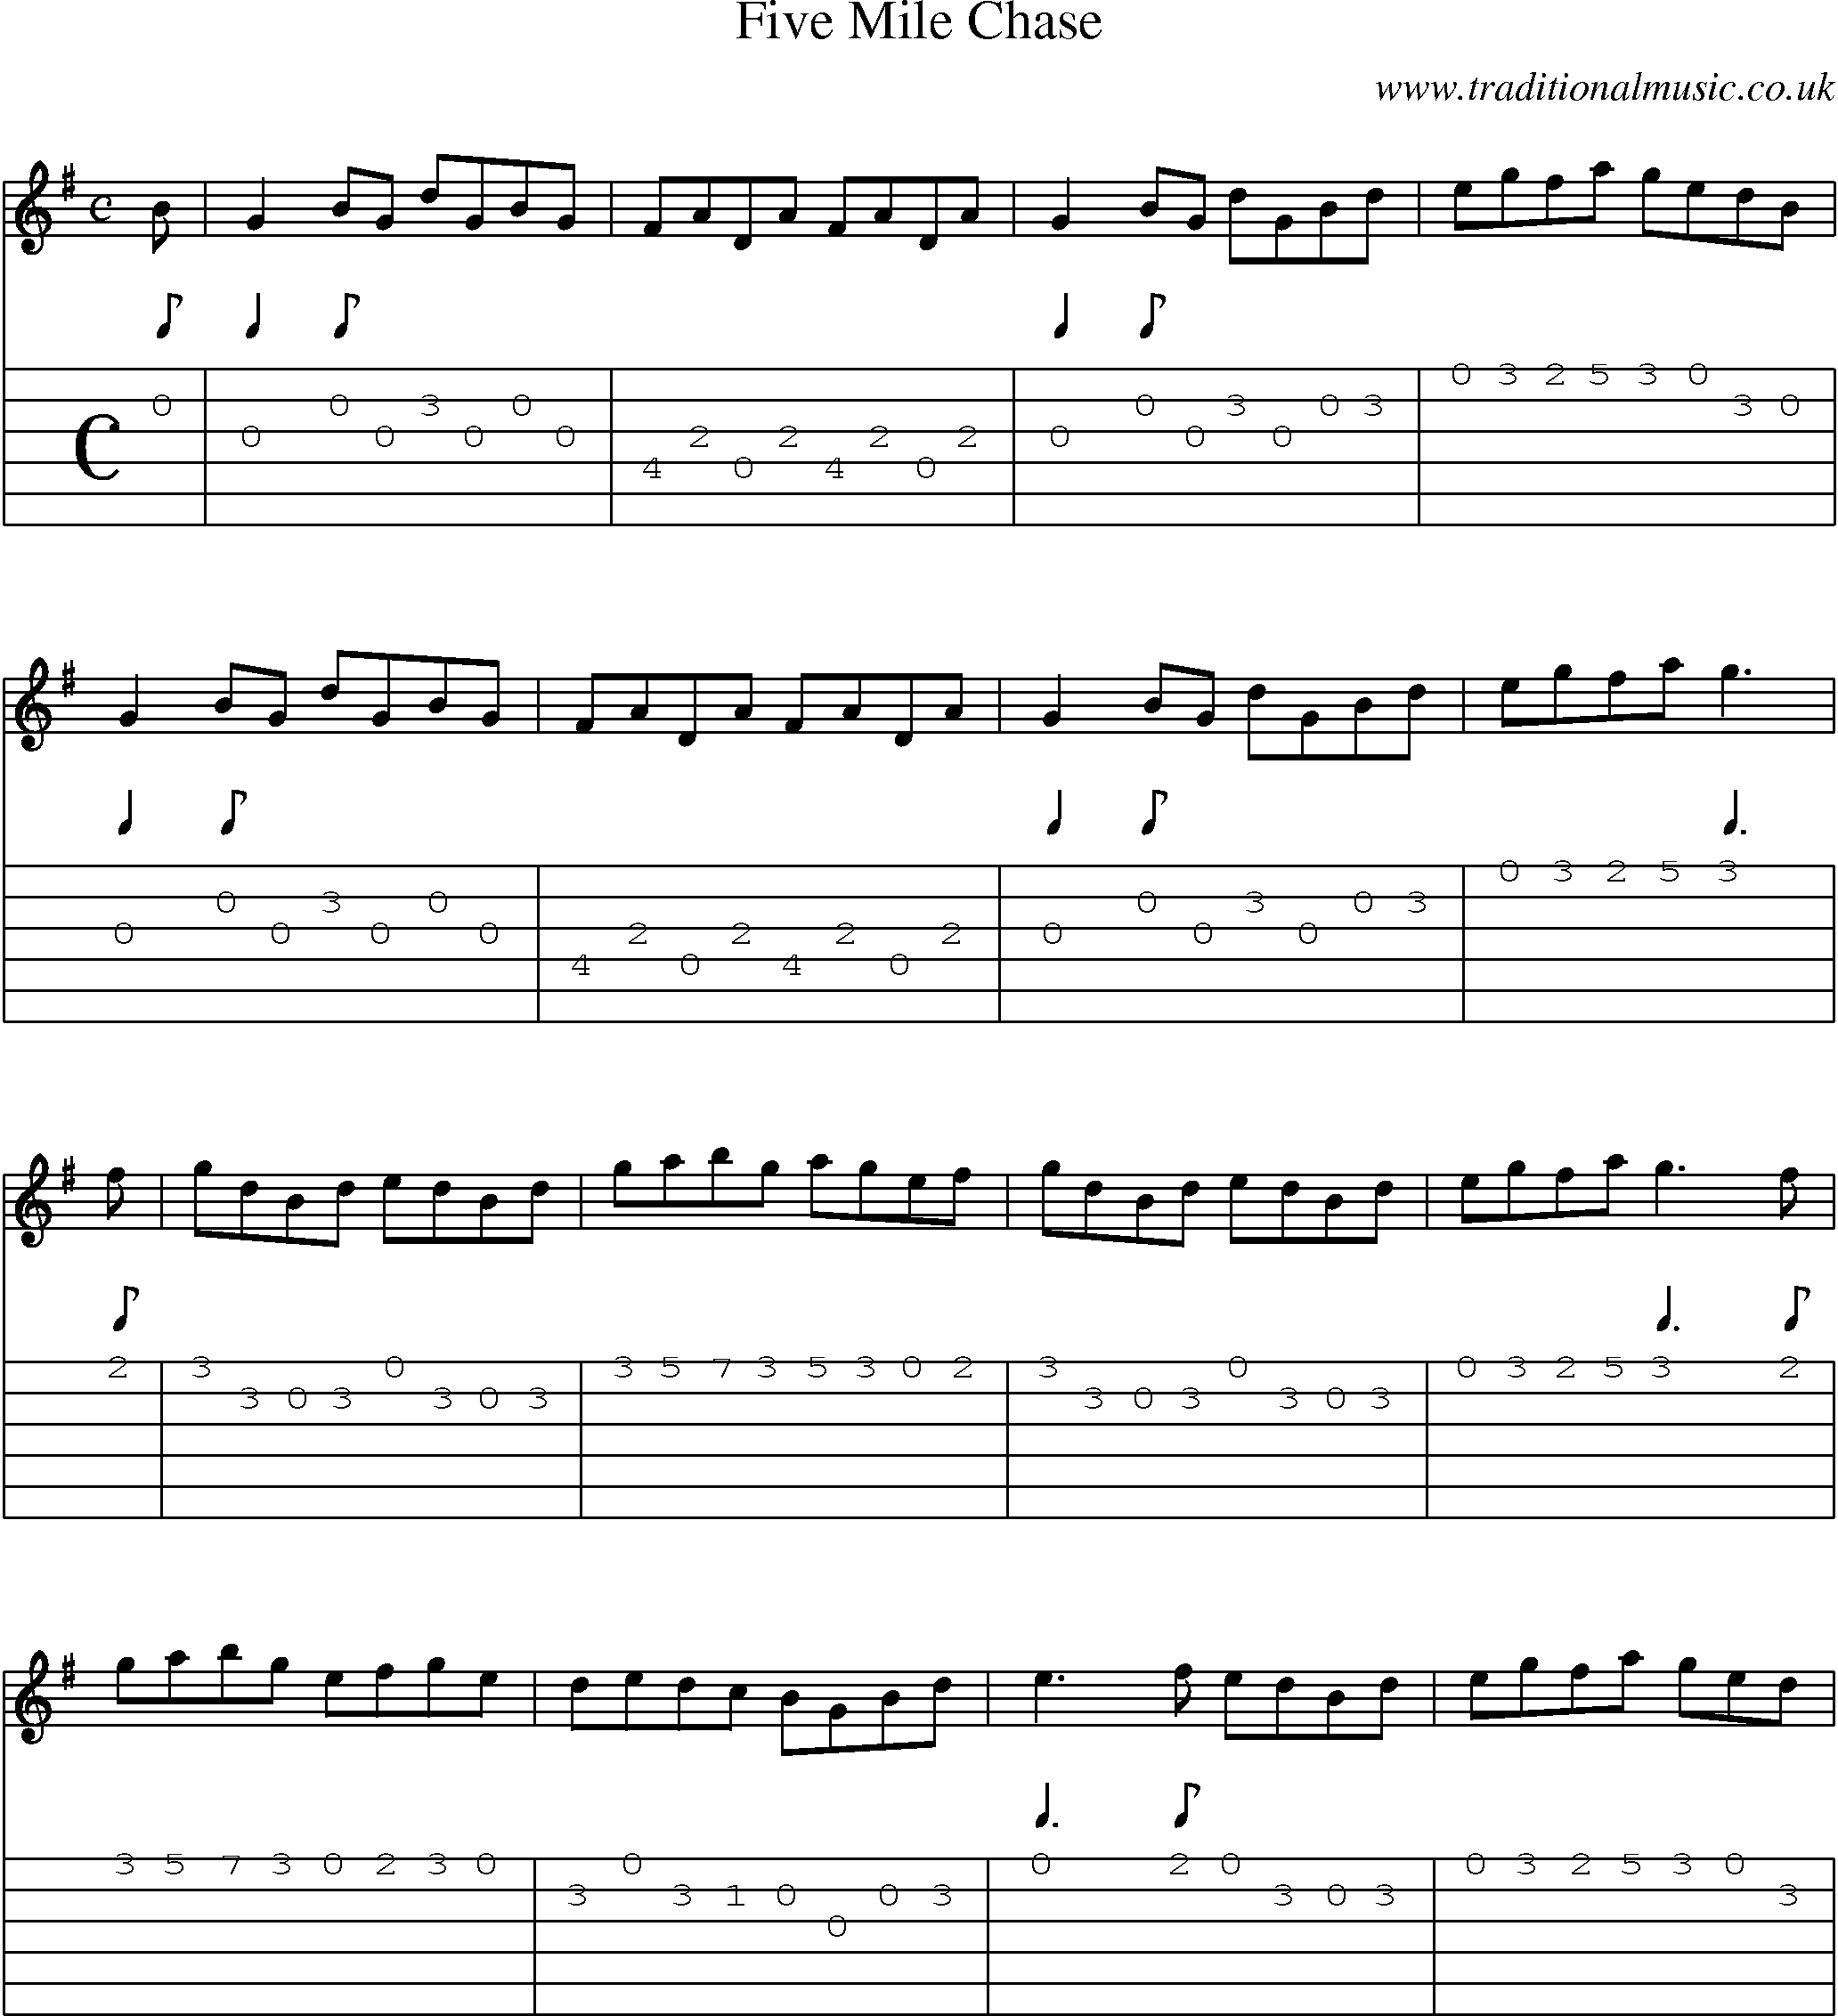 Music Score and Guitar Tabs for Five Mile Chase